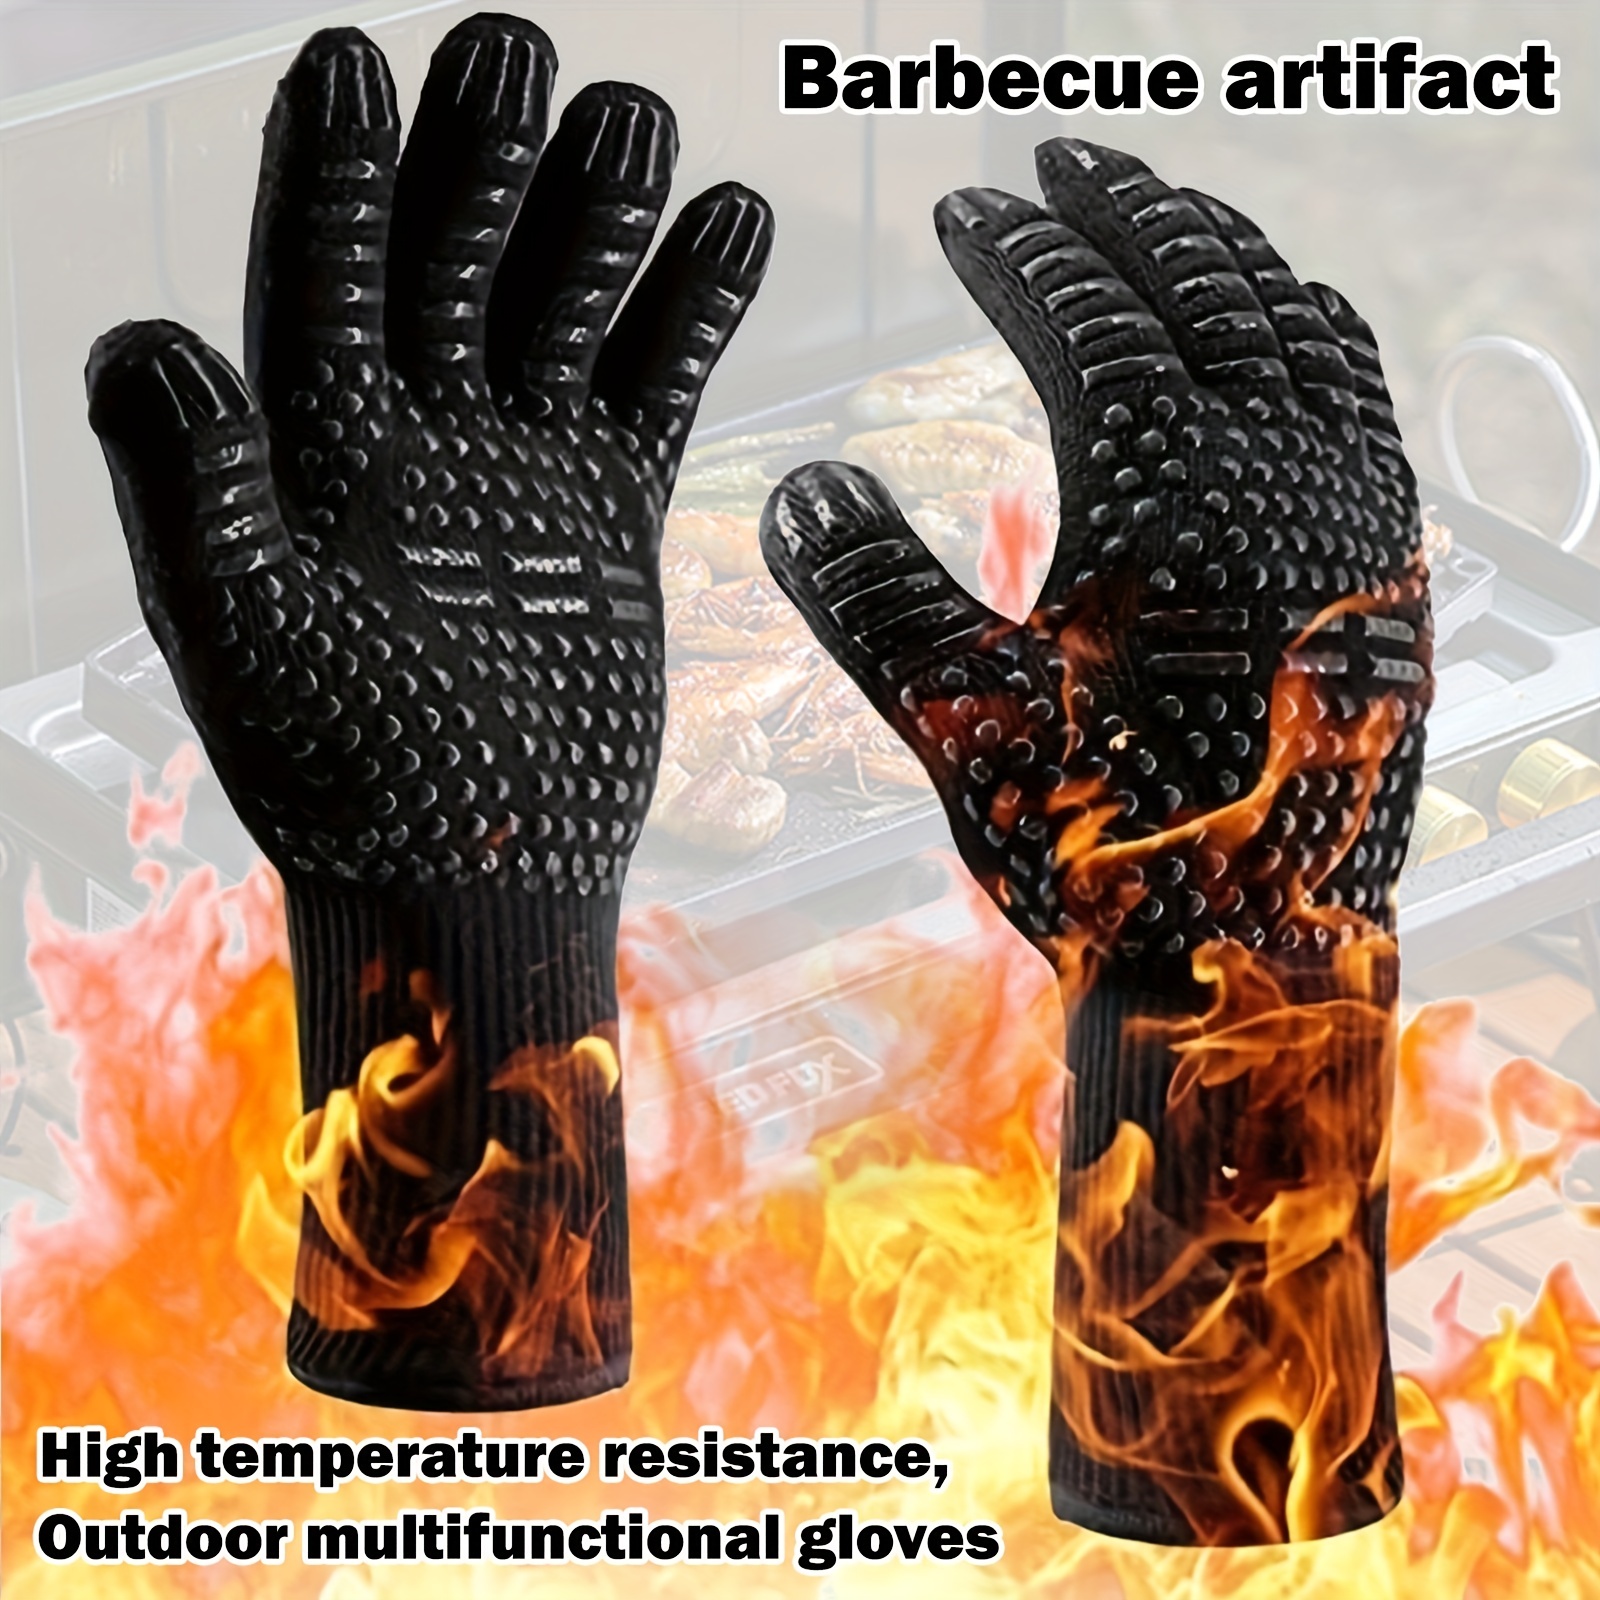 Types of Kitchen Gloves: Heat-Resistant, Cut-Resistant